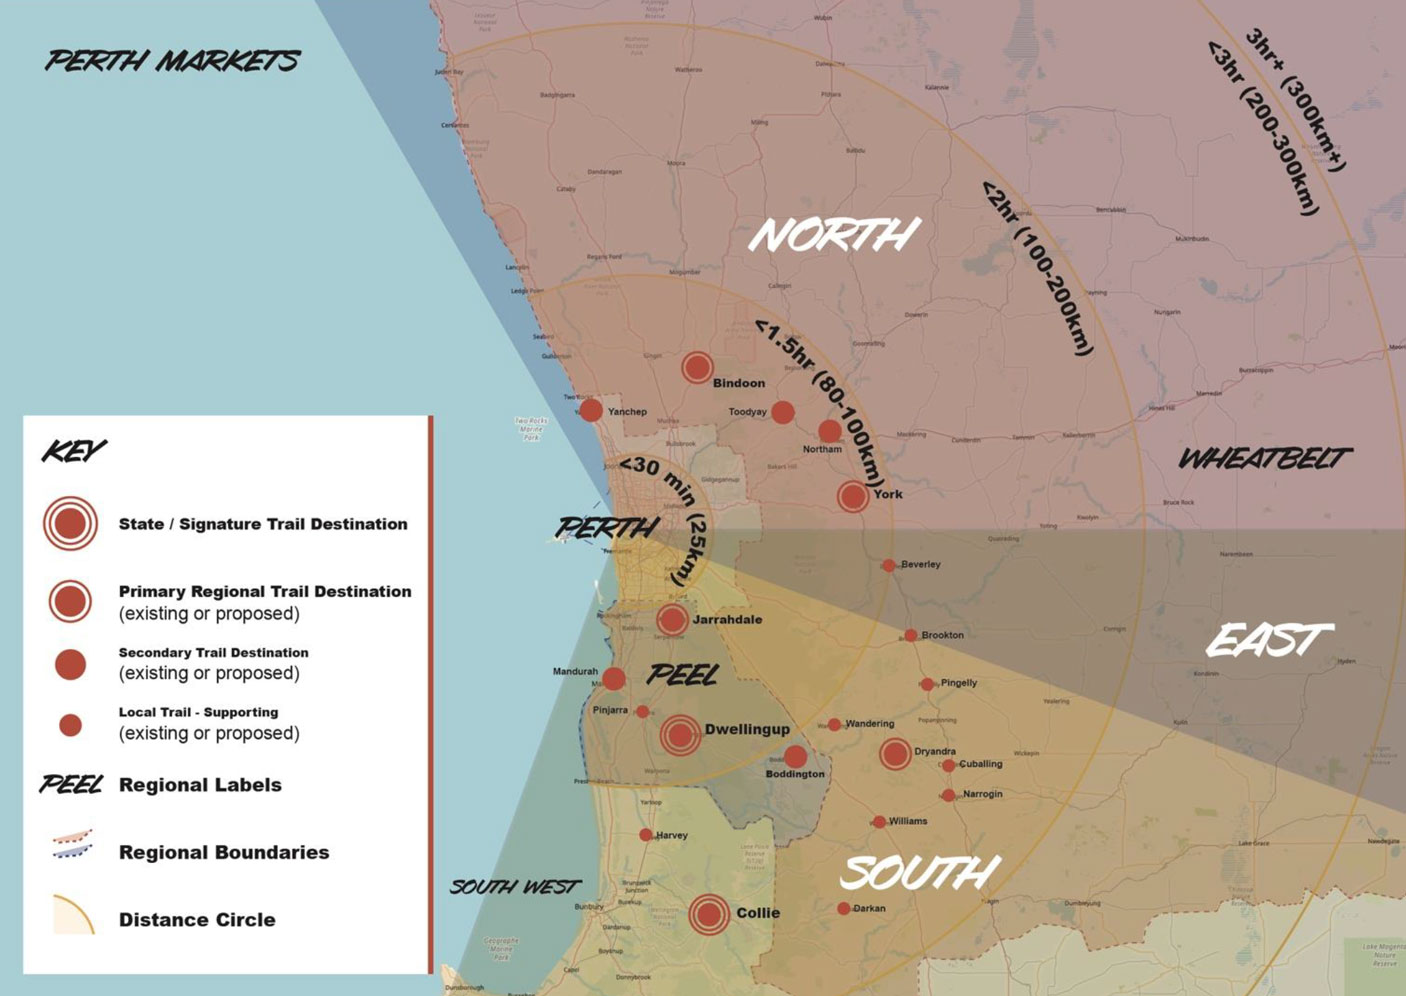 Map of Perth and regions with concentric circles at100kms, 200 kms and 300 kms from Perth, showing distance people travel.